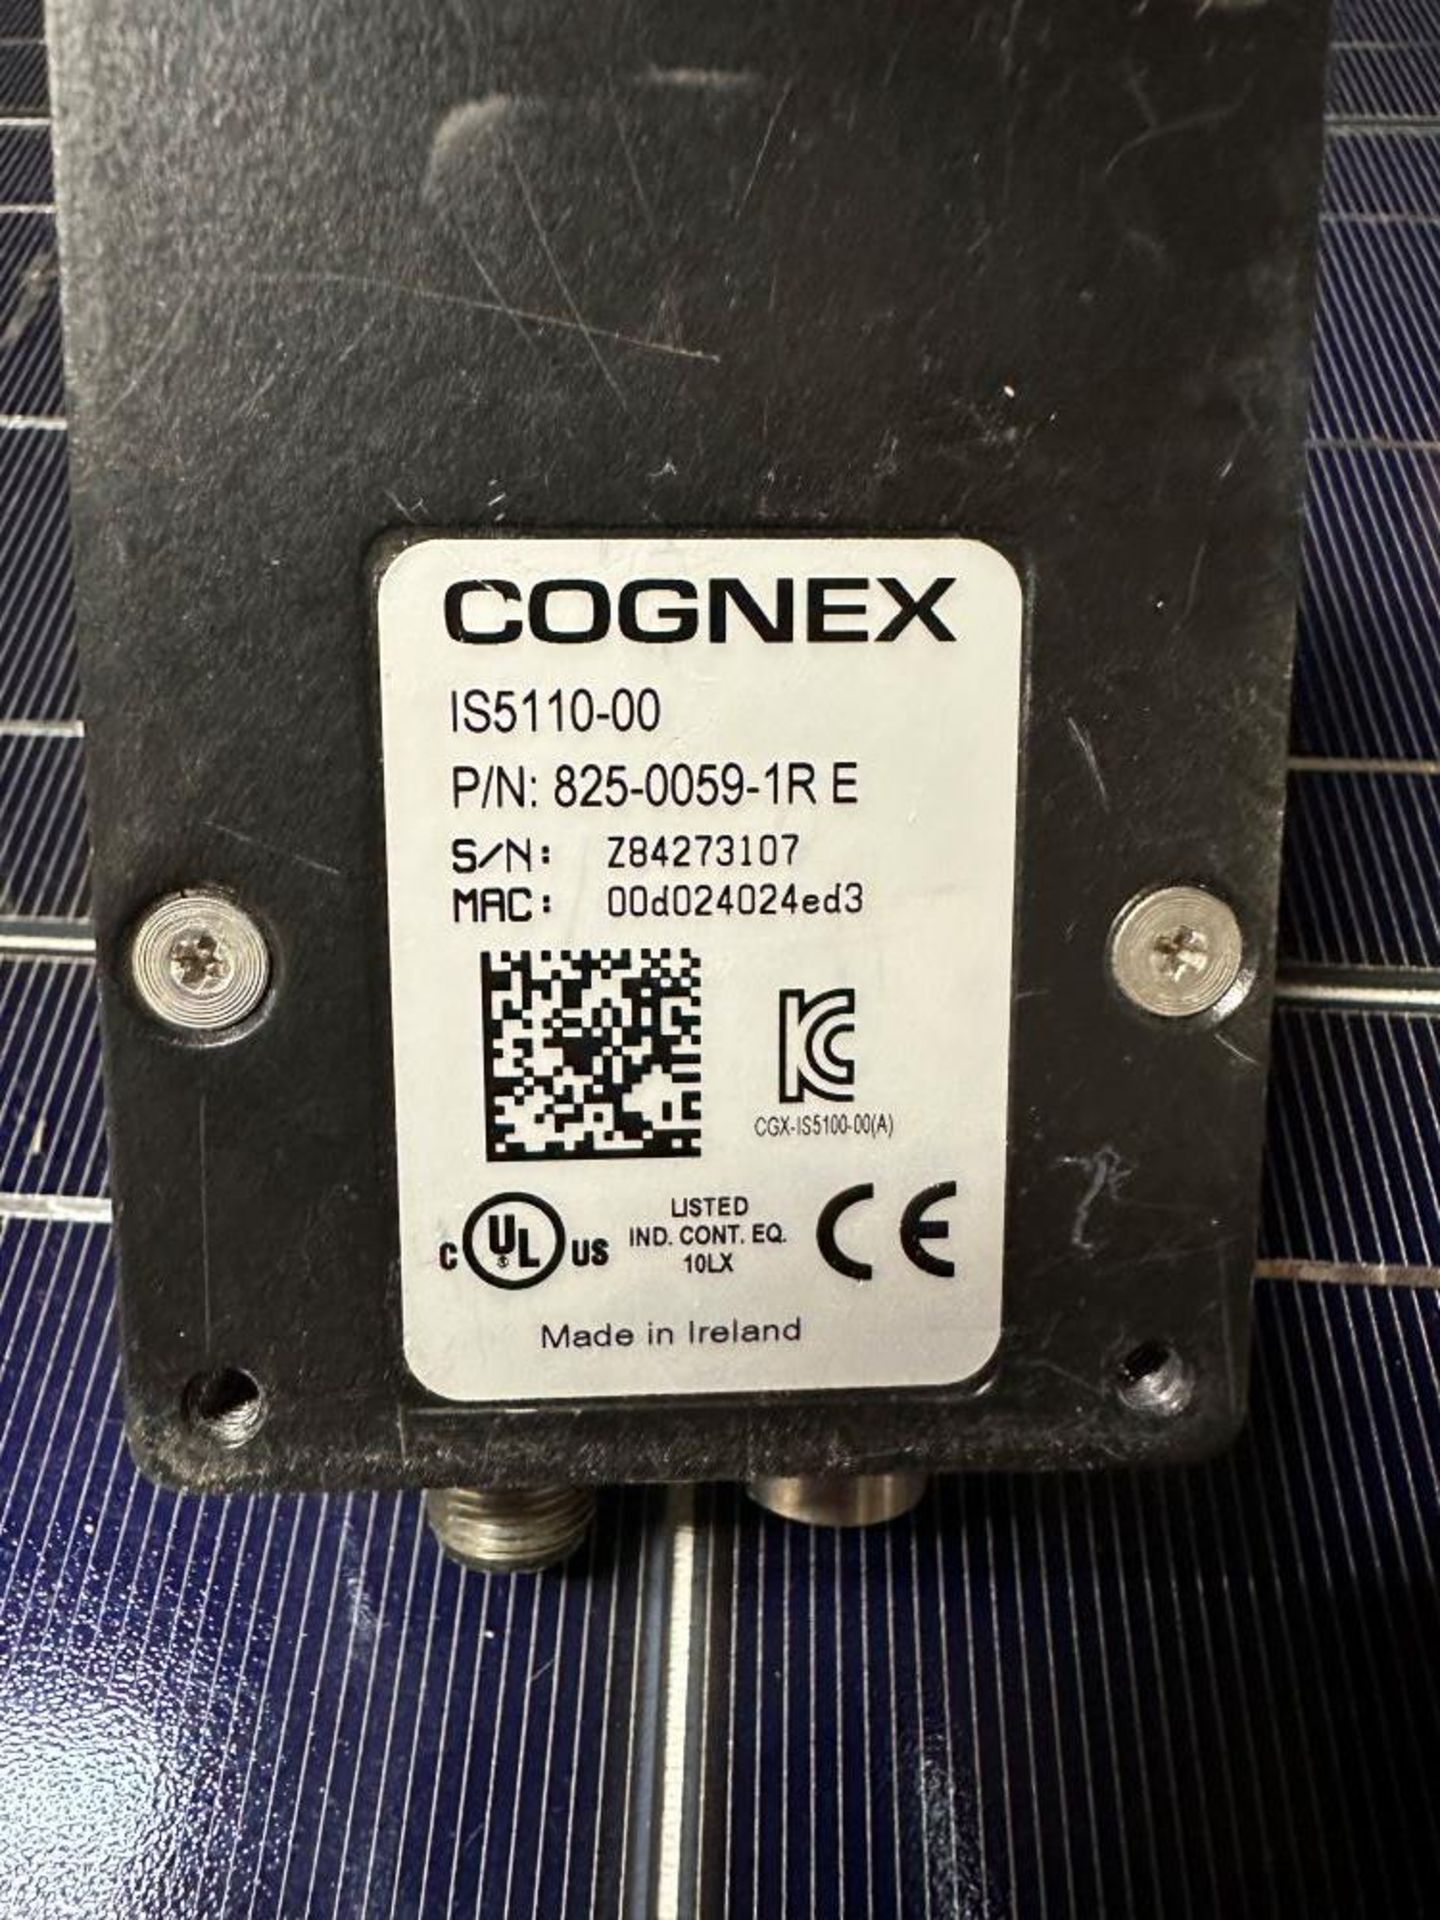 COGNEX IS5110-00 IN-SIGHT VISION INDUSTRIAL CAMERA - Image 4 of 5